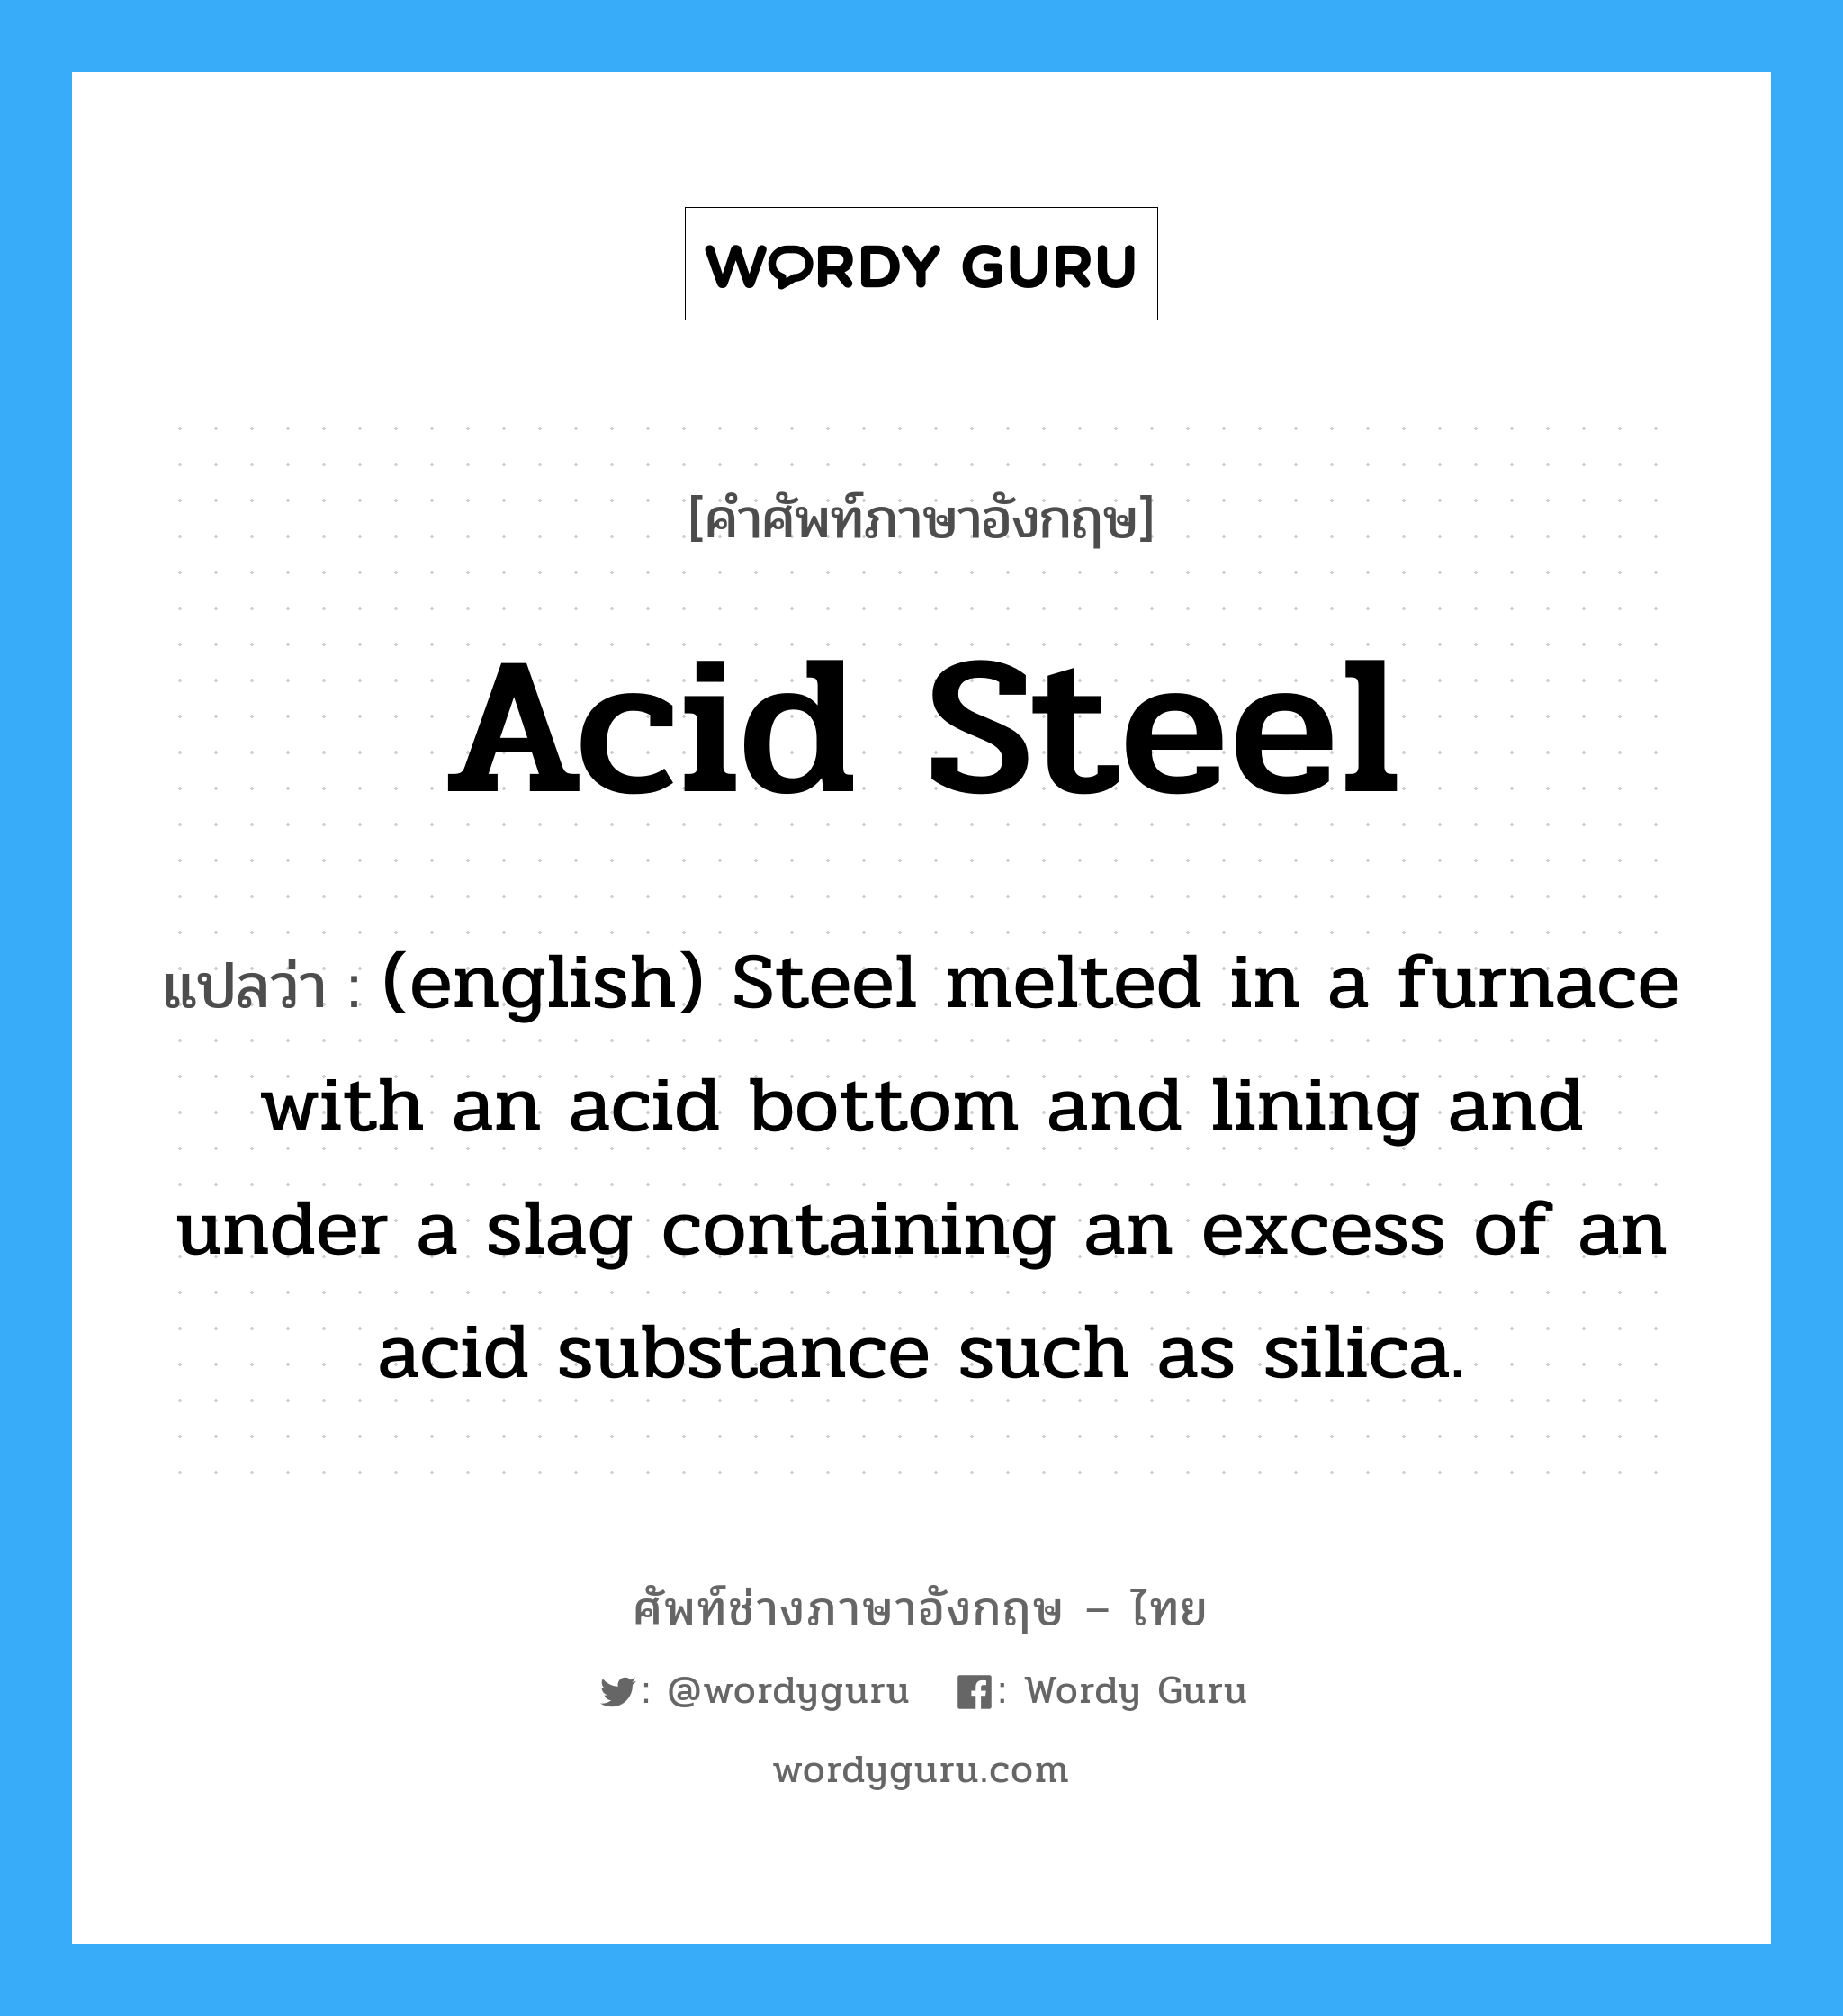 Acid Steel แปลว่า?, คำศัพท์ช่างภาษาอังกฤษ - ไทย Acid Steel คำศัพท์ภาษาอังกฤษ Acid Steel แปลว่า (english) Steel melted in a furnace with an acid bottom and lining and under a slag containing an excess of an acid substance such as silica.